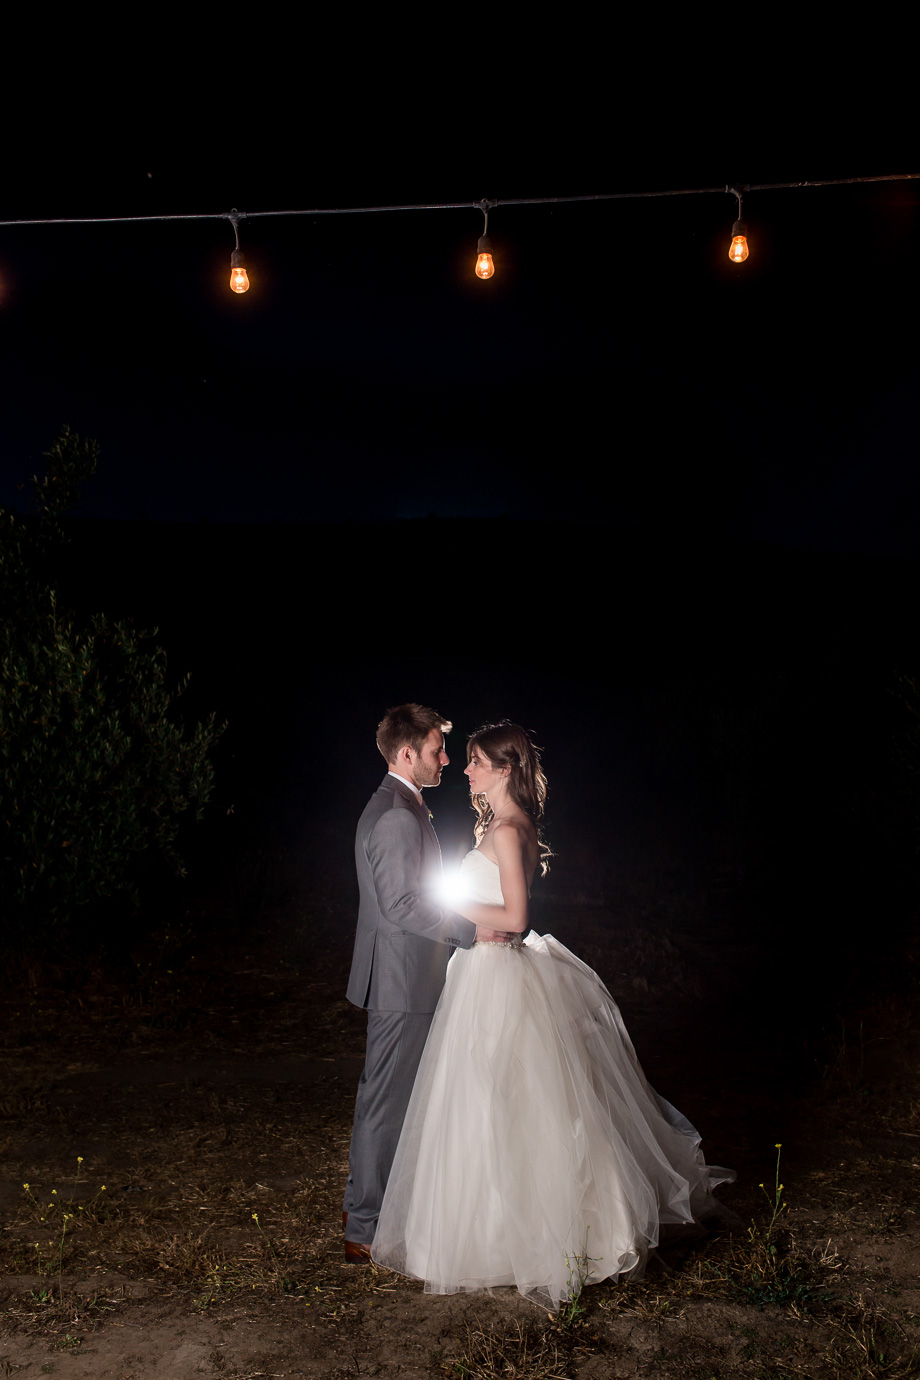 a night shot of bride and groom under the cafe string lights